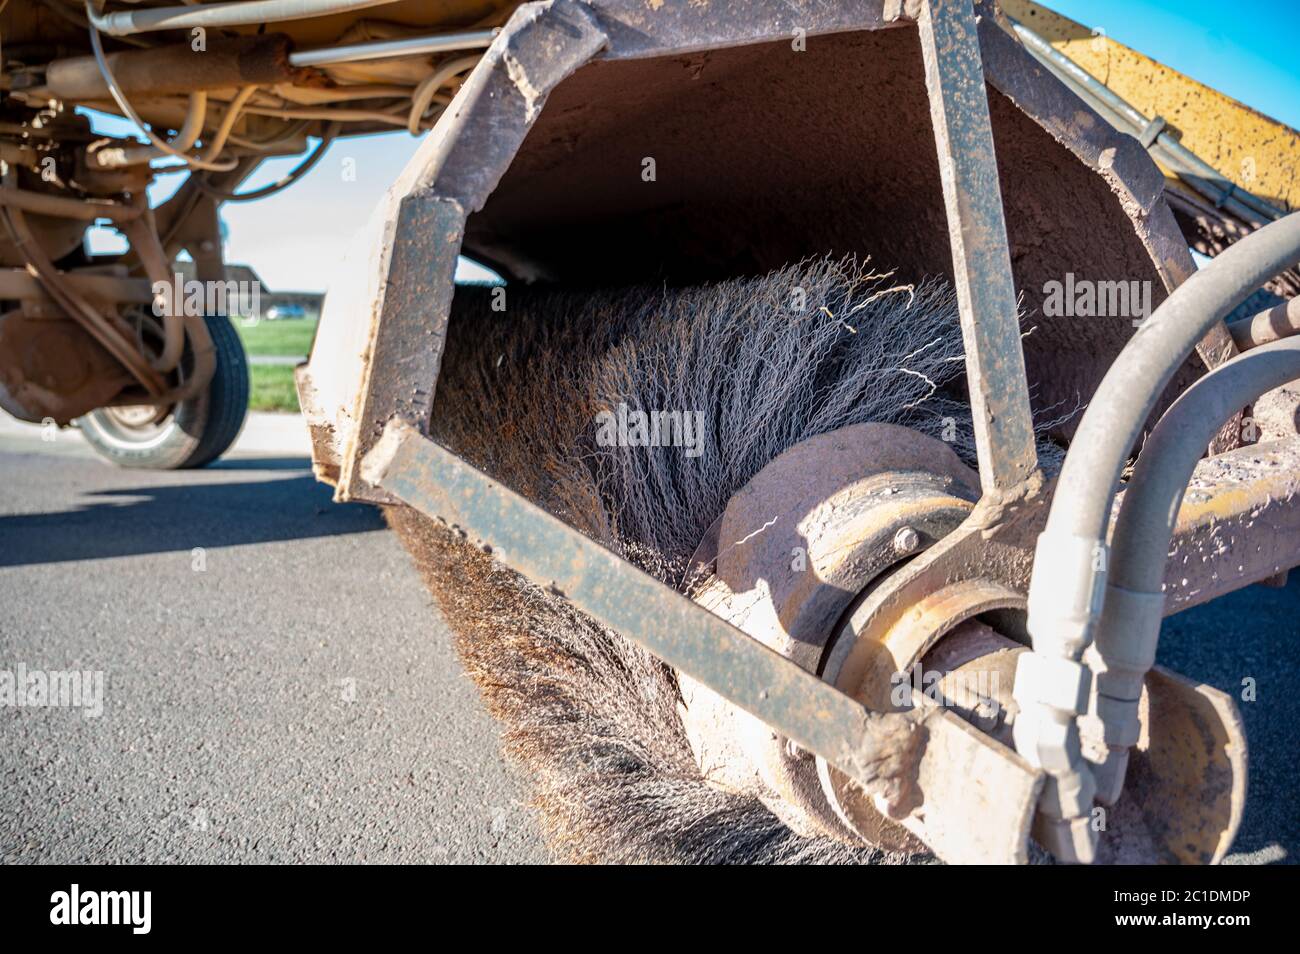 Street sweeper used in construction cleanup activity to remove dirts from paved surfaces Stock Photo